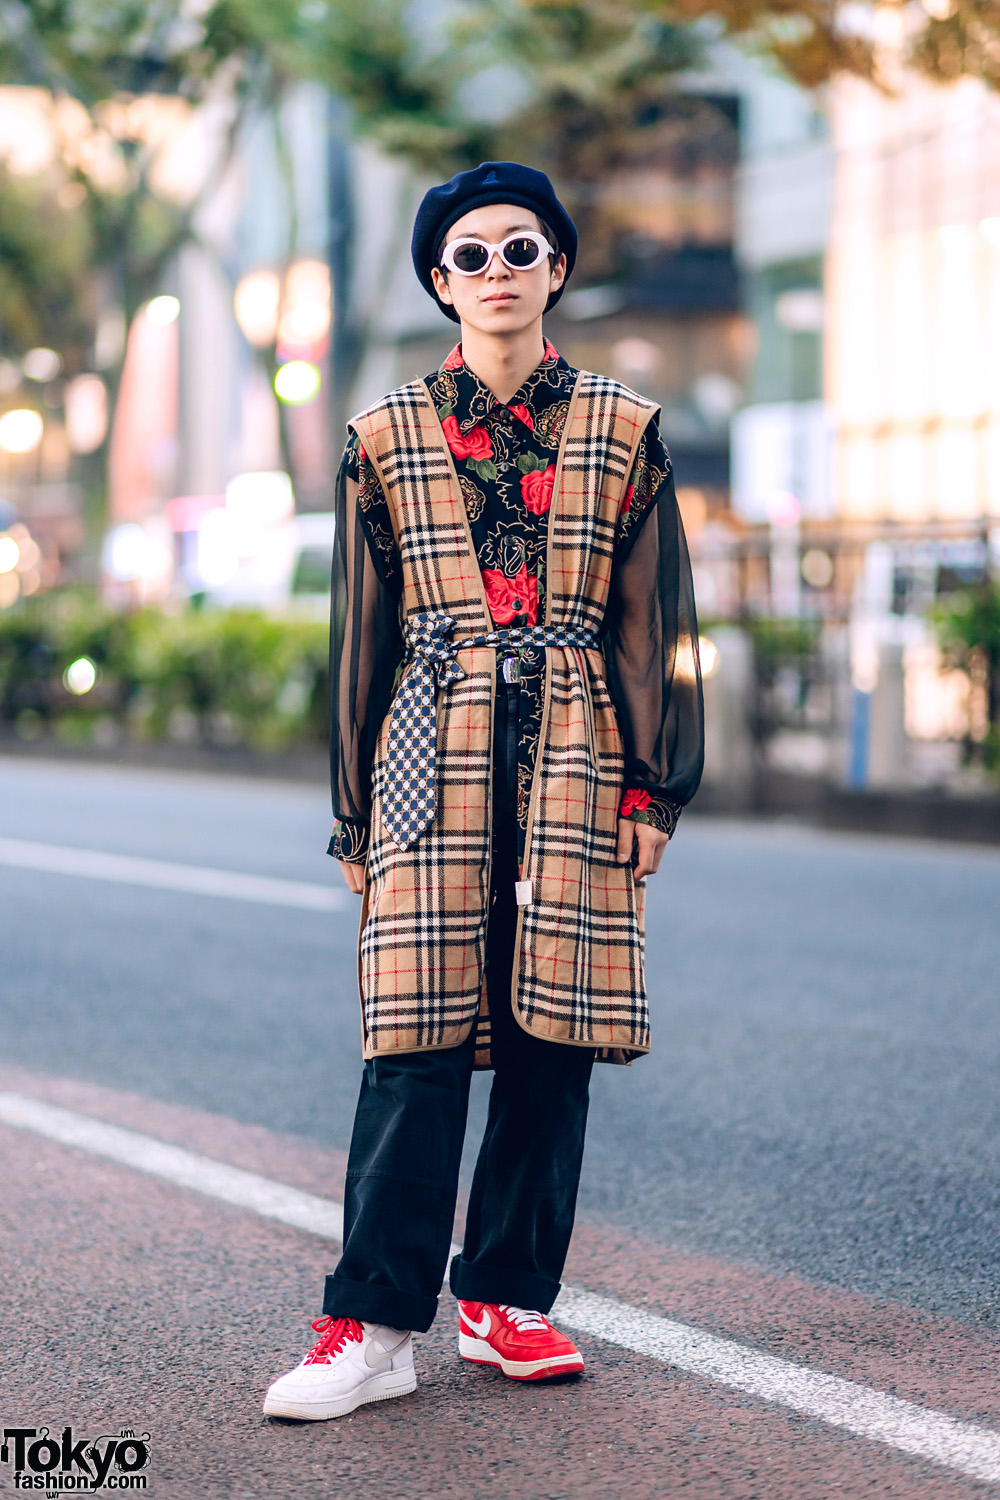 Mixed Prints Street Style in Harajuku w/ Burberry Coat Liner